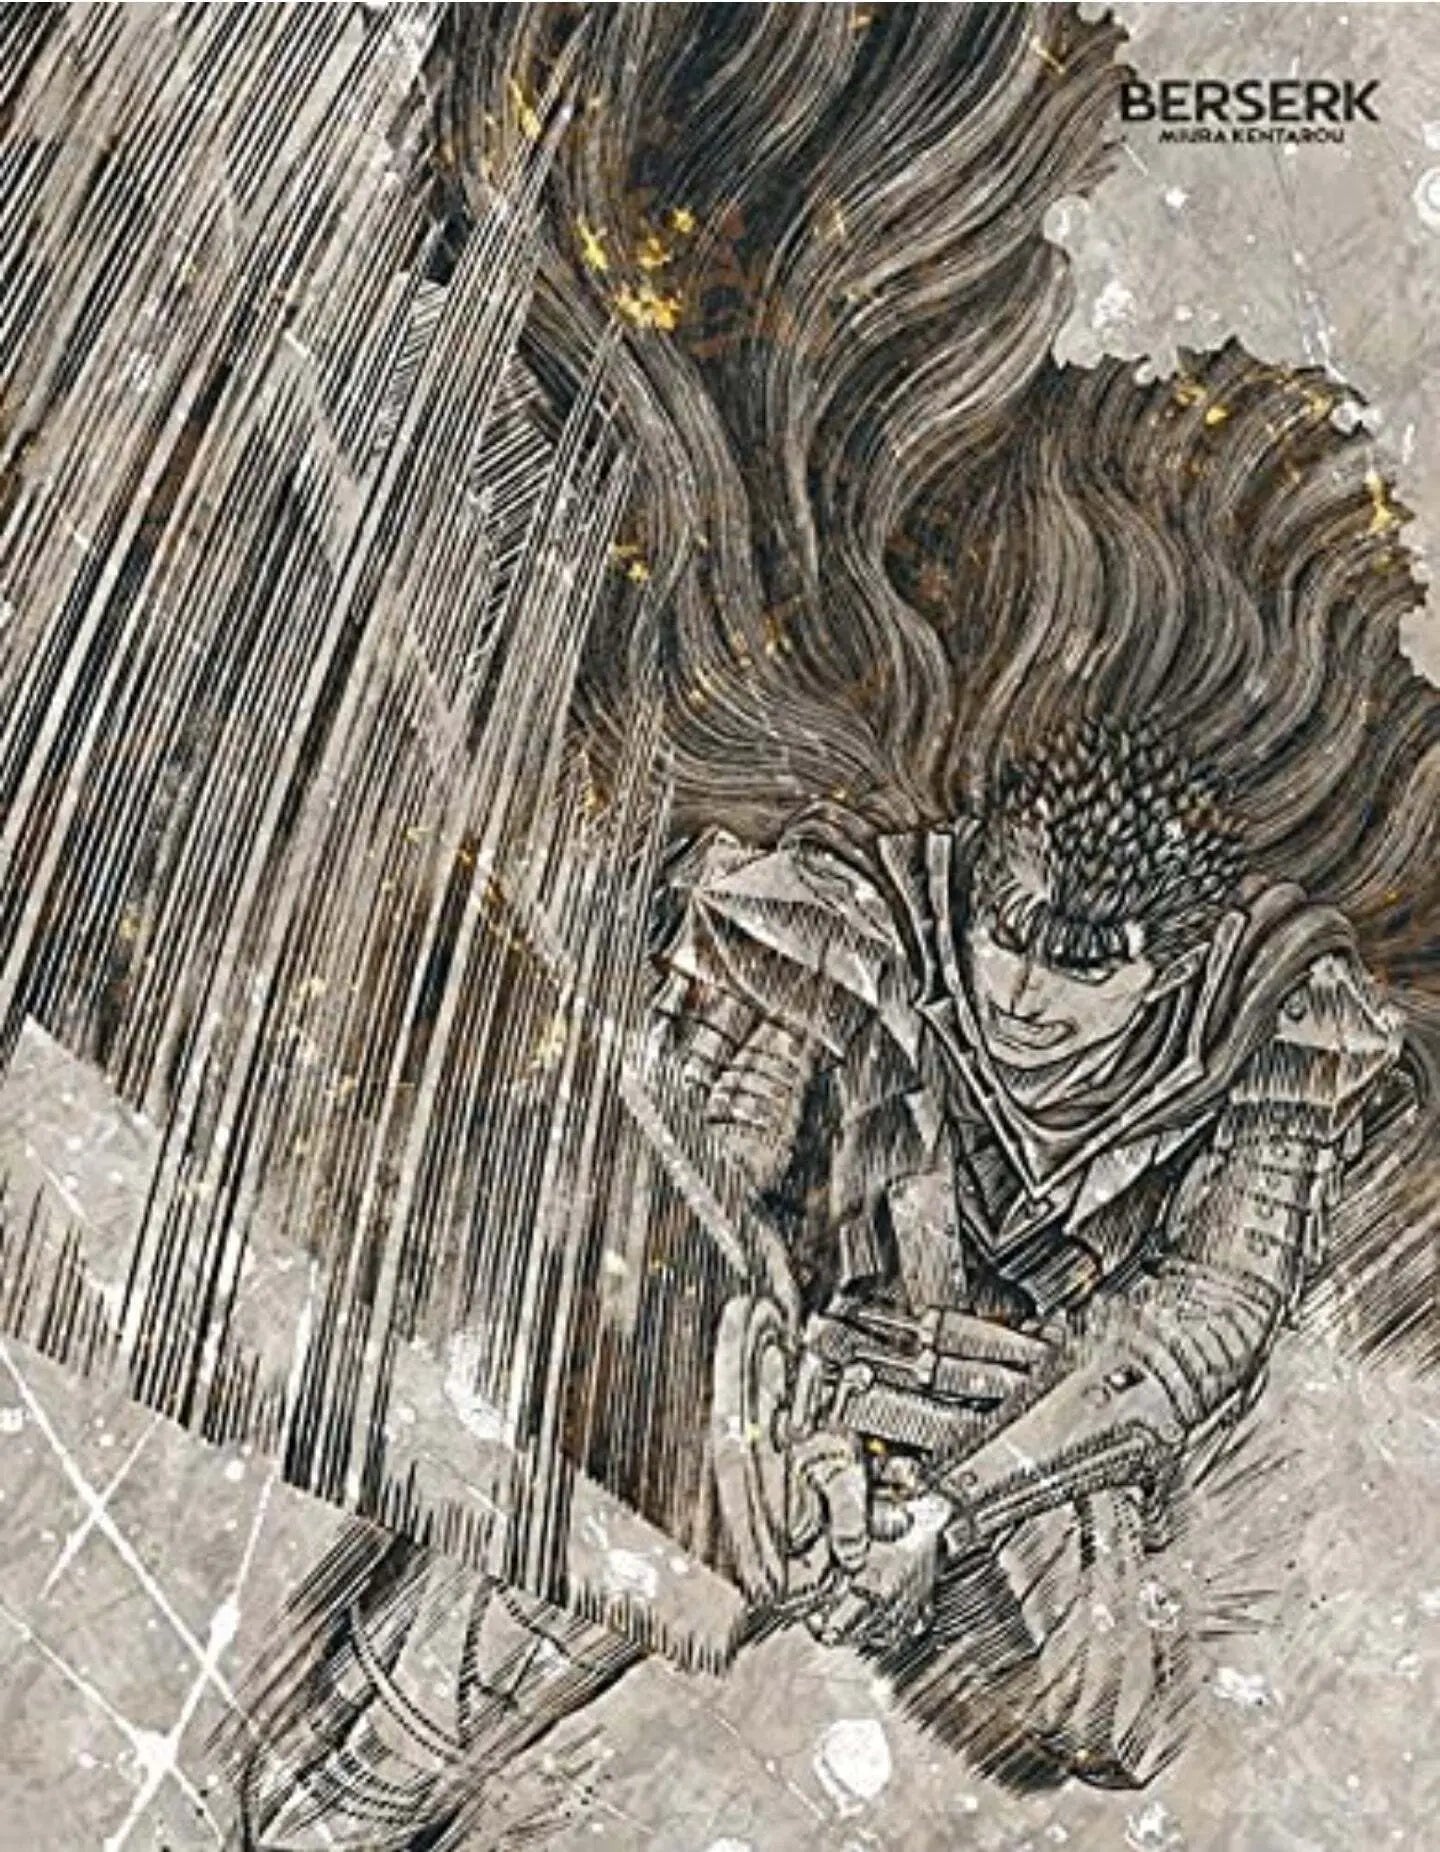 BERSERK Vol. 41 SPECIAL EDITION WITH CANVA GUTS - JAPAN EXCLUSIVE